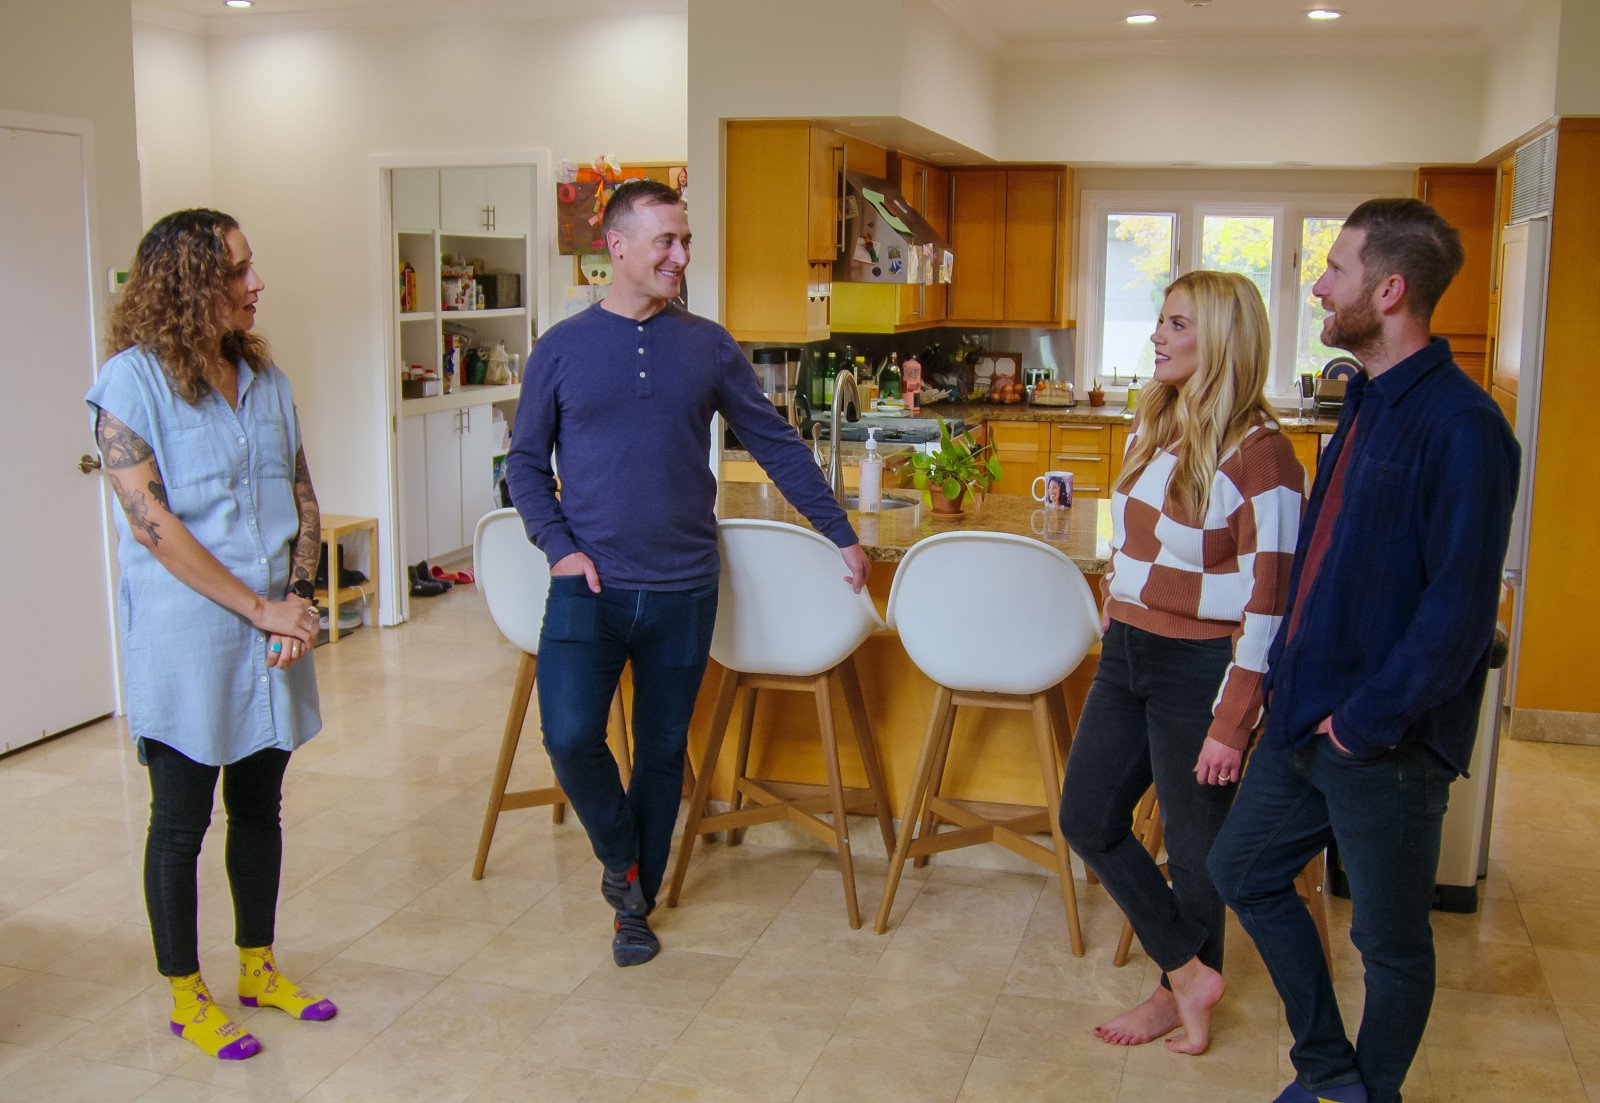 Syd and Shea McGee and their clients in 'Dream Home Makeover' Season 4 on Netflix. They're standing in a kitchen and talking.